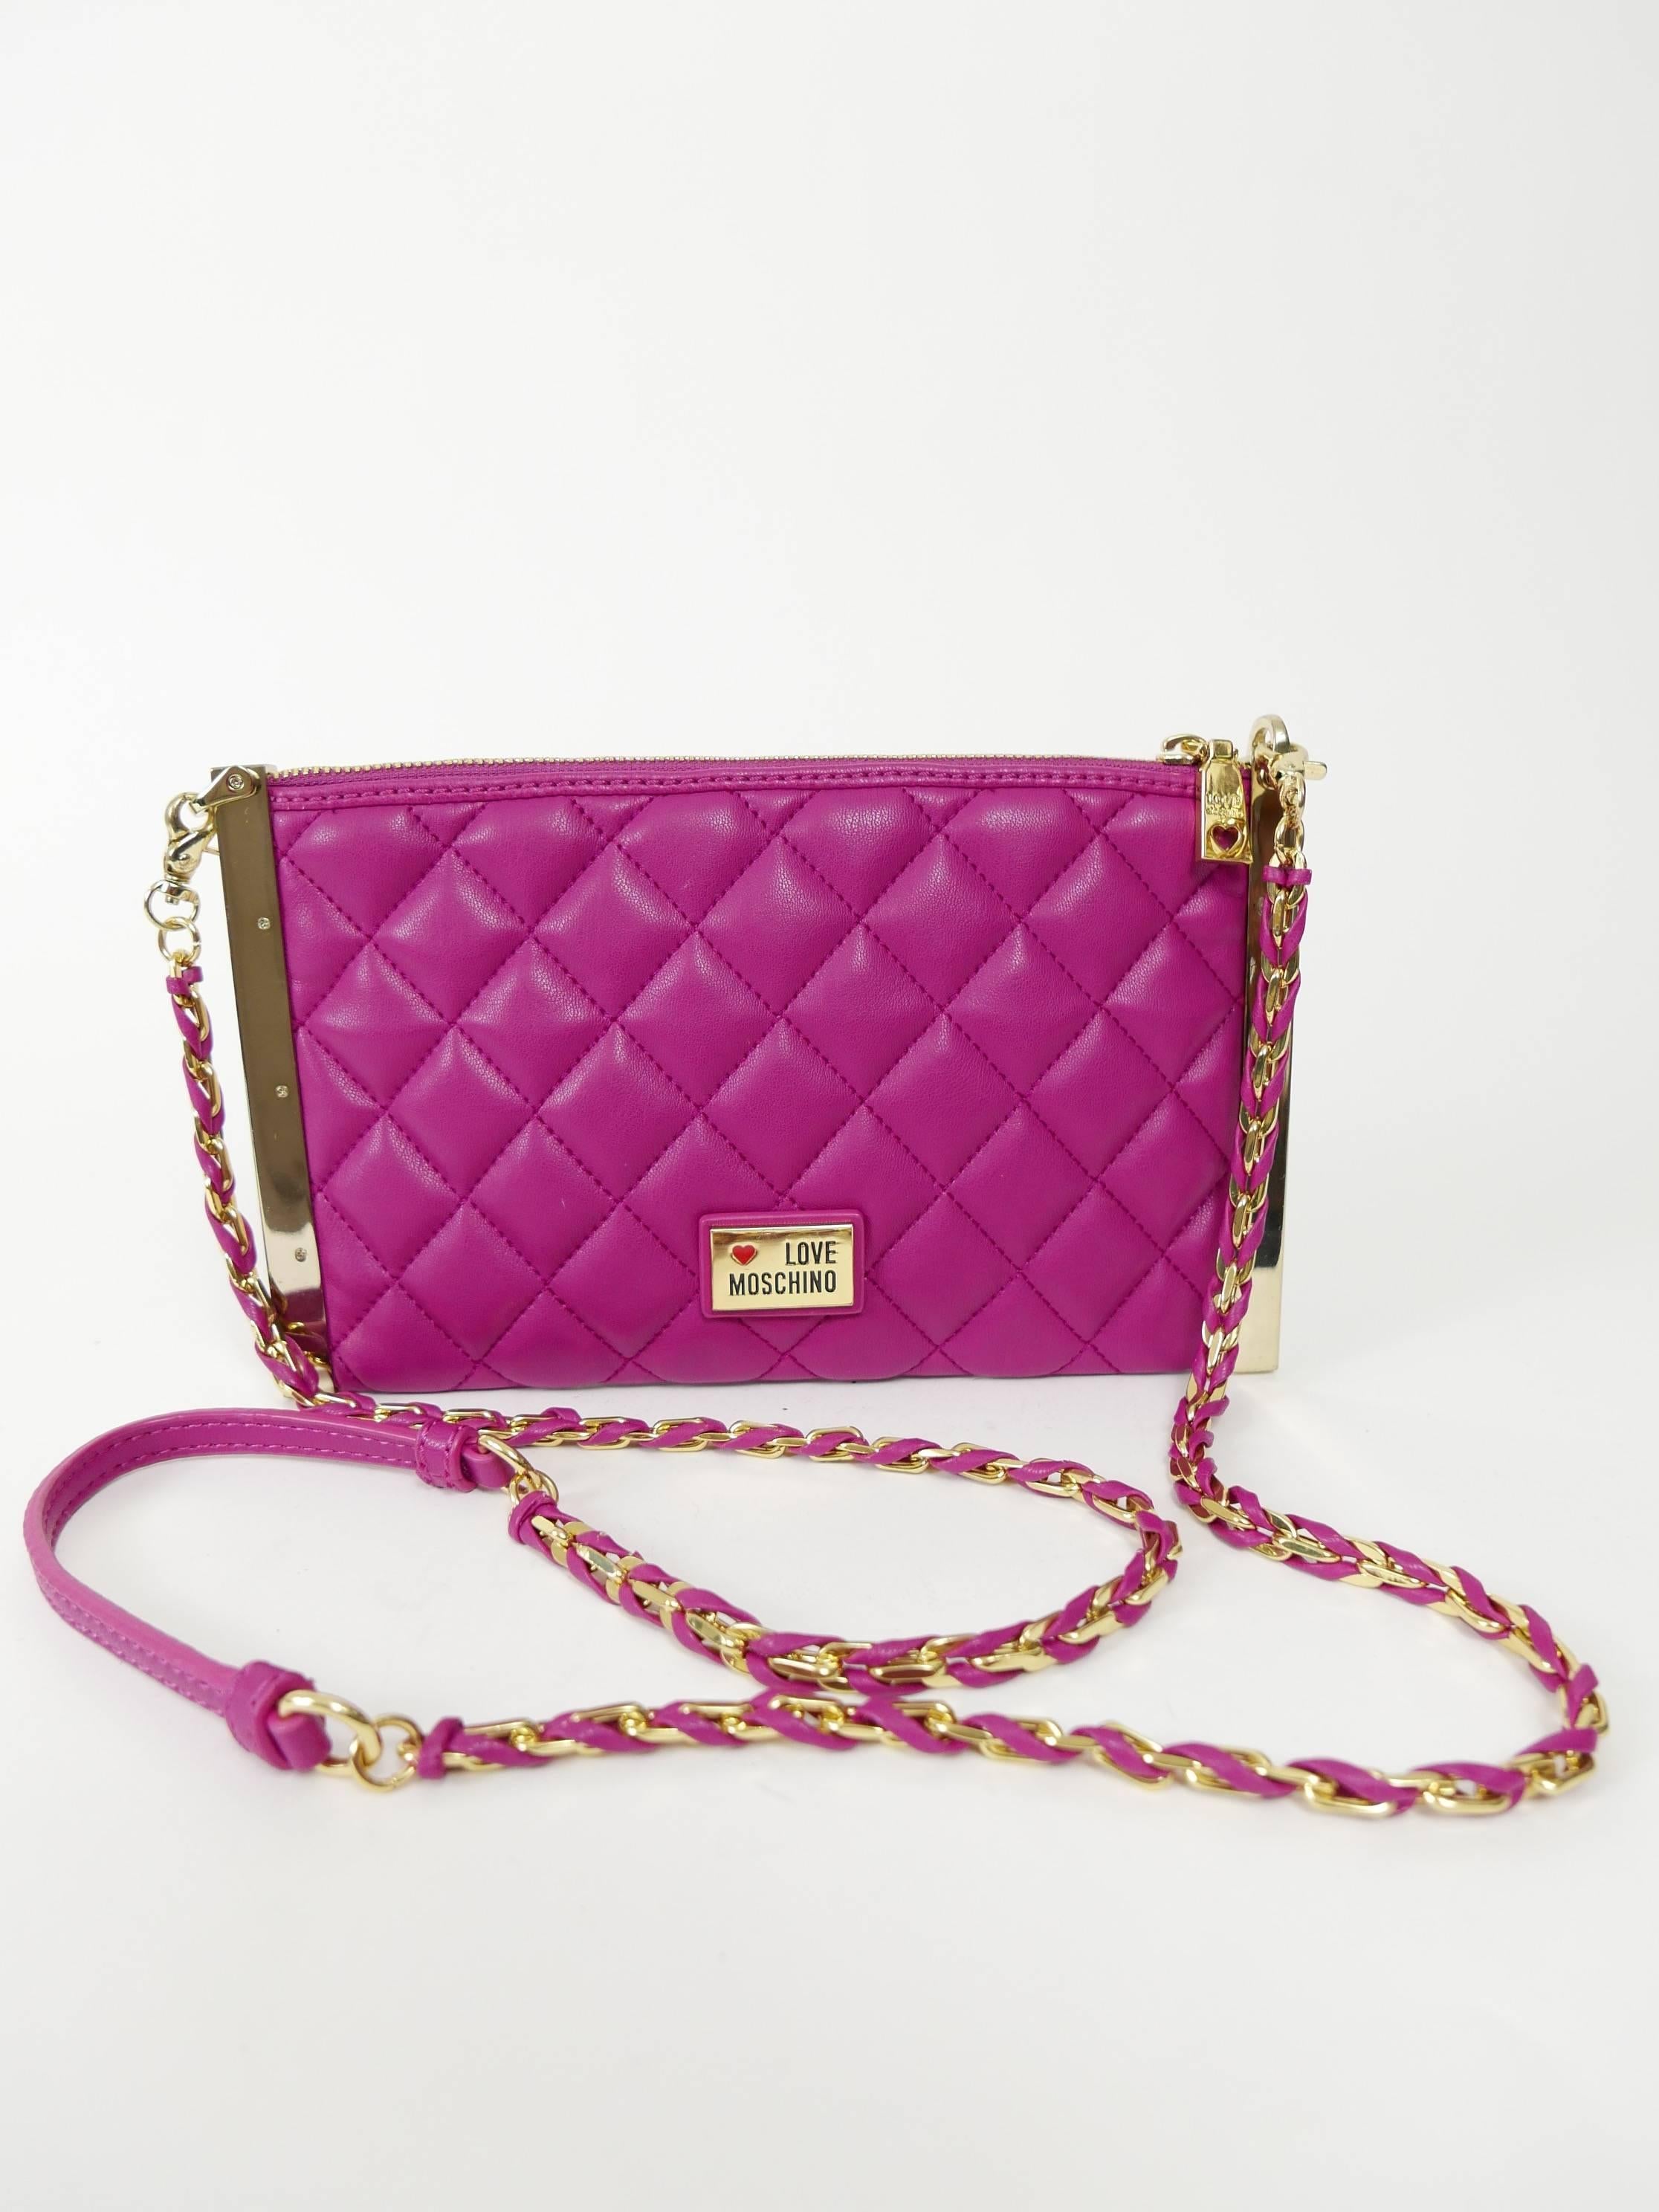 This glamourous Moschino clutch purse is in a fuchsia matelasse leather with golden metal Logo detail. It has removable shoulder strap chain in golden metal and fuchsia leather, zip closure with gold hardware, inside Love Moschino custom fabric